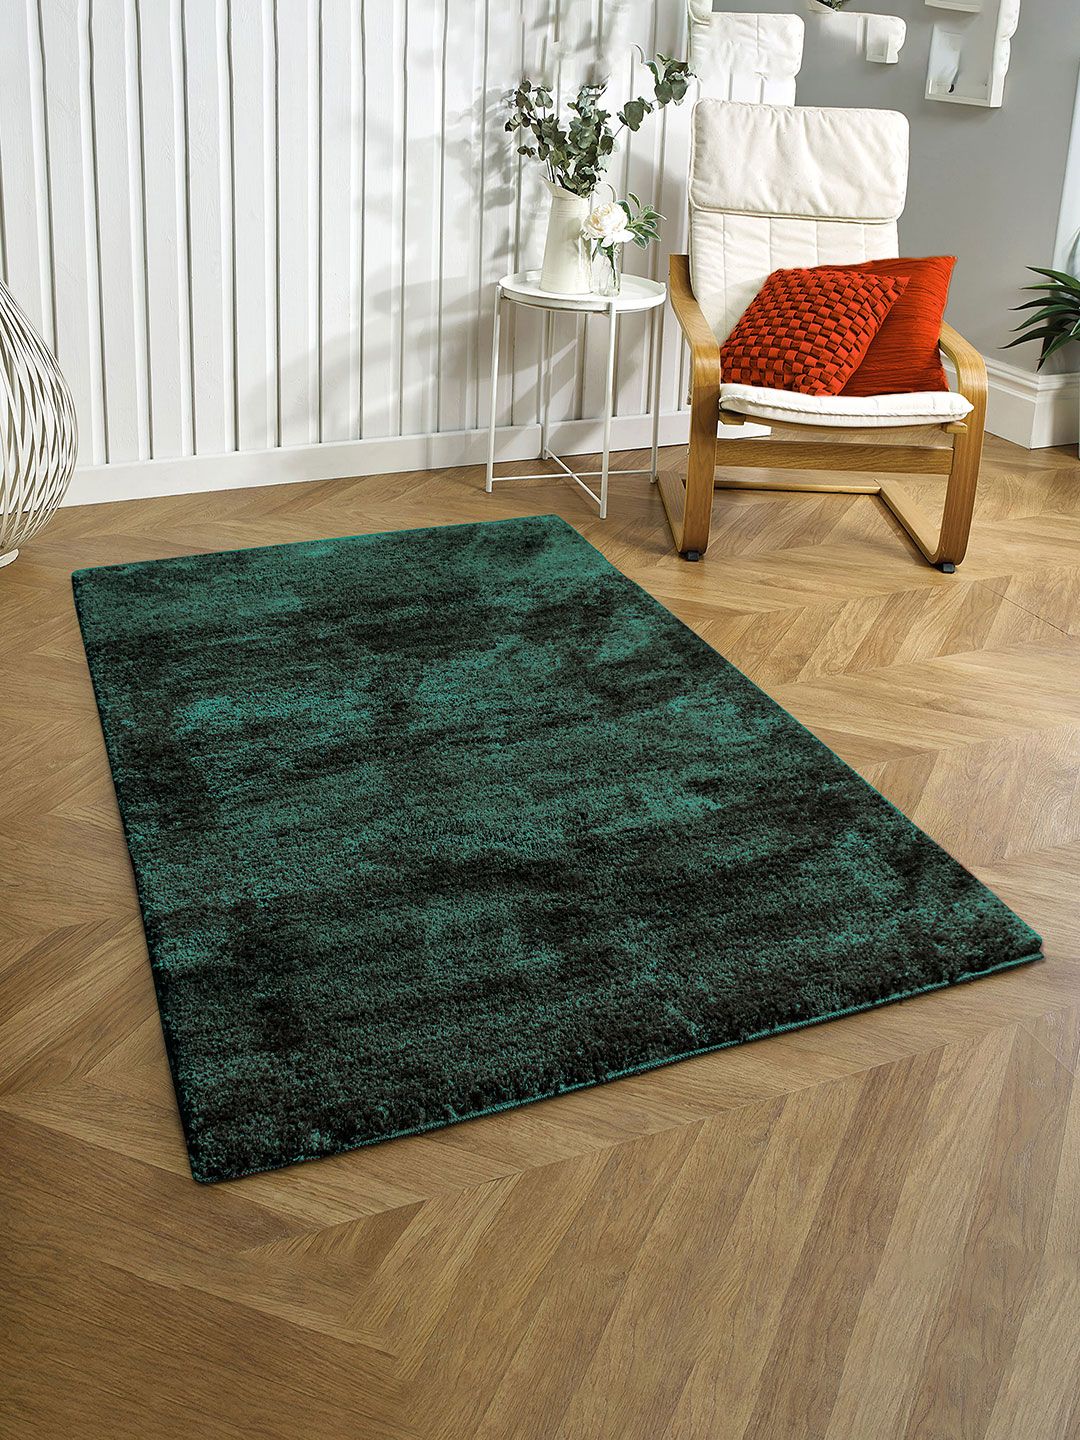 LUXEHOME INTERNATIONAL Green Solid Anti-Skid Carpet Price in India